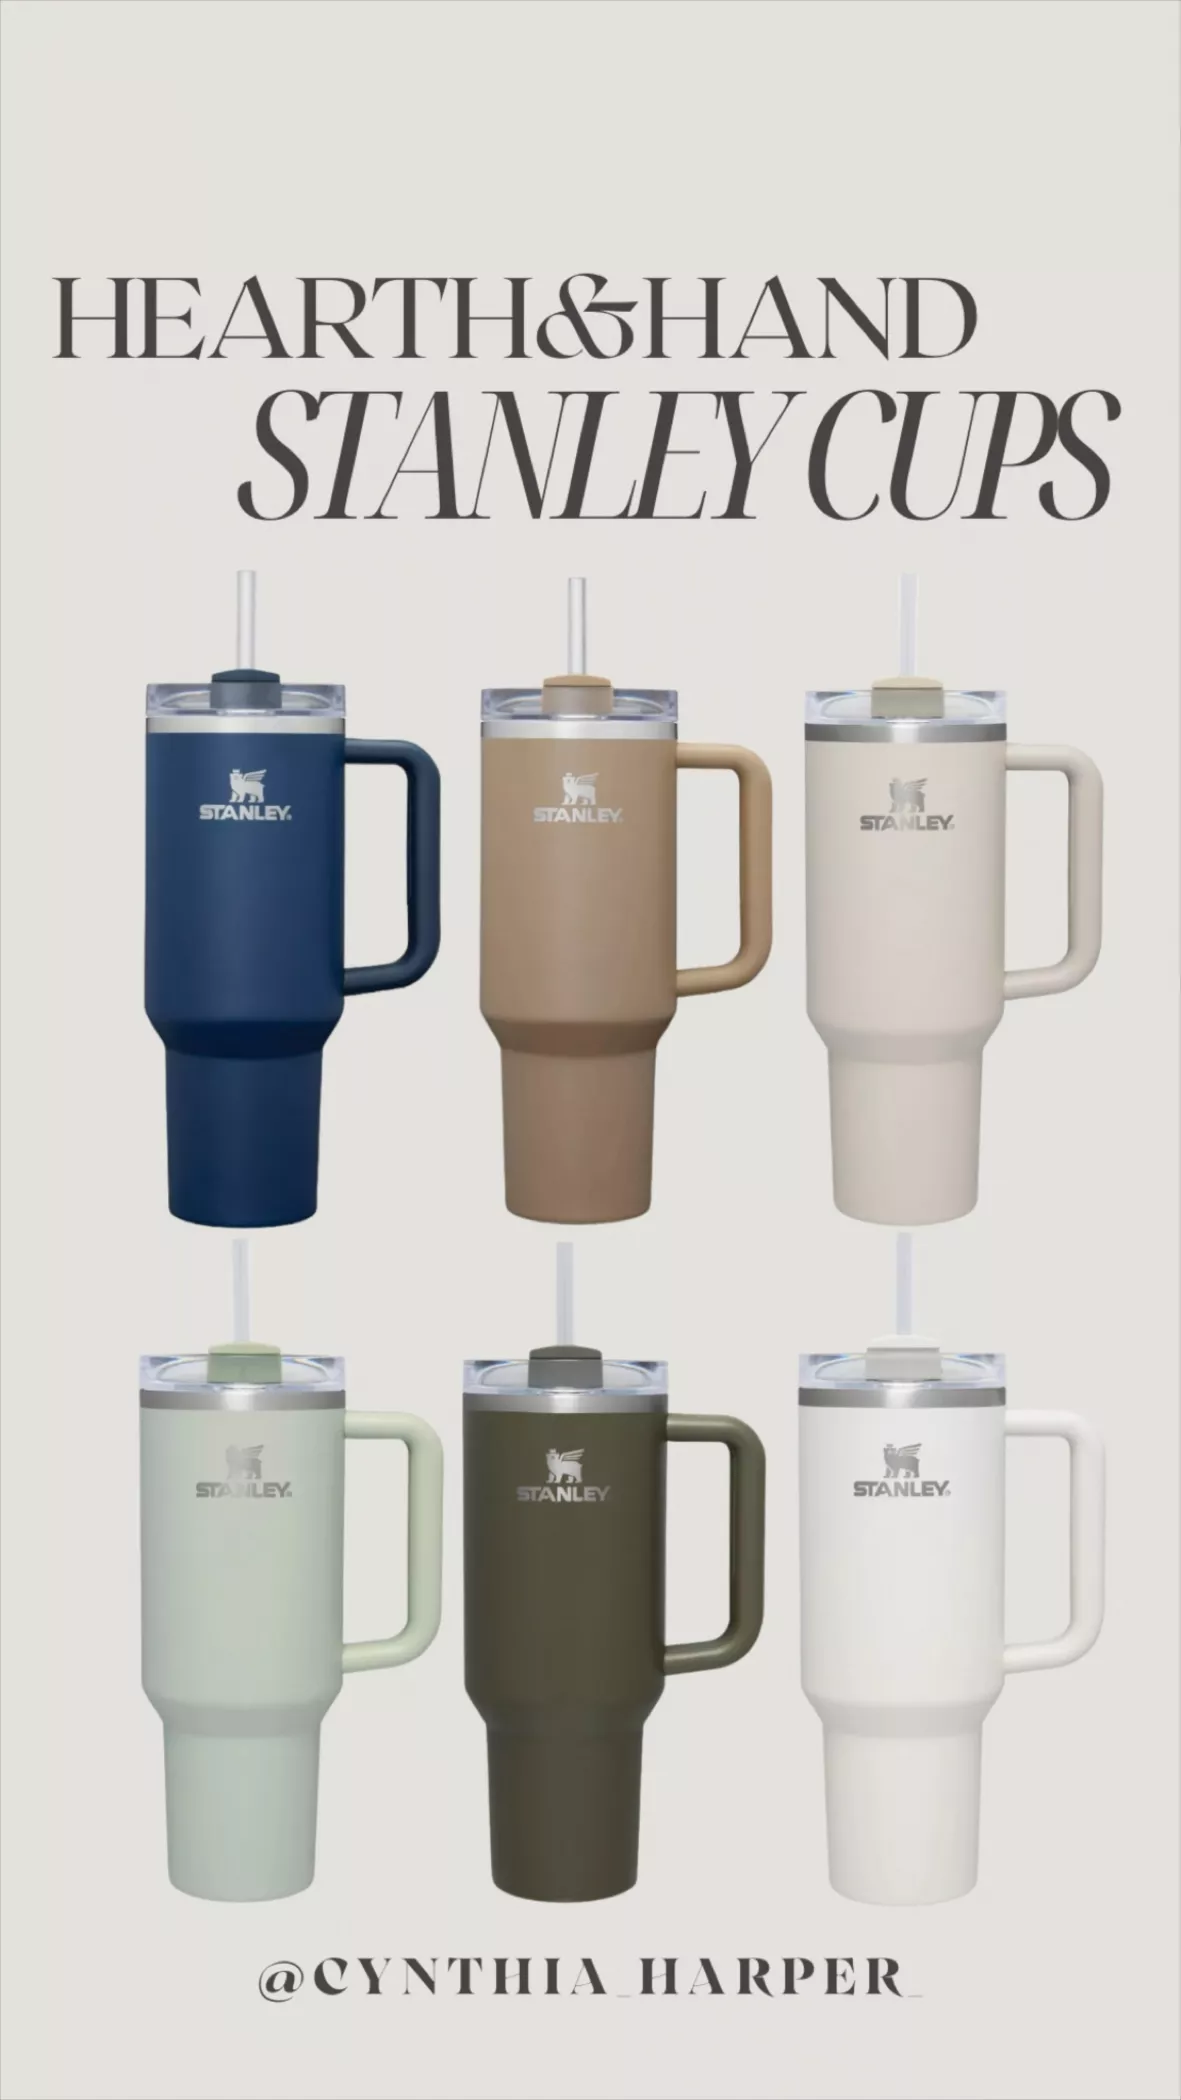 Stanley Teams Up With Hearth & Hand For A Target-Exclusive Cup Collection